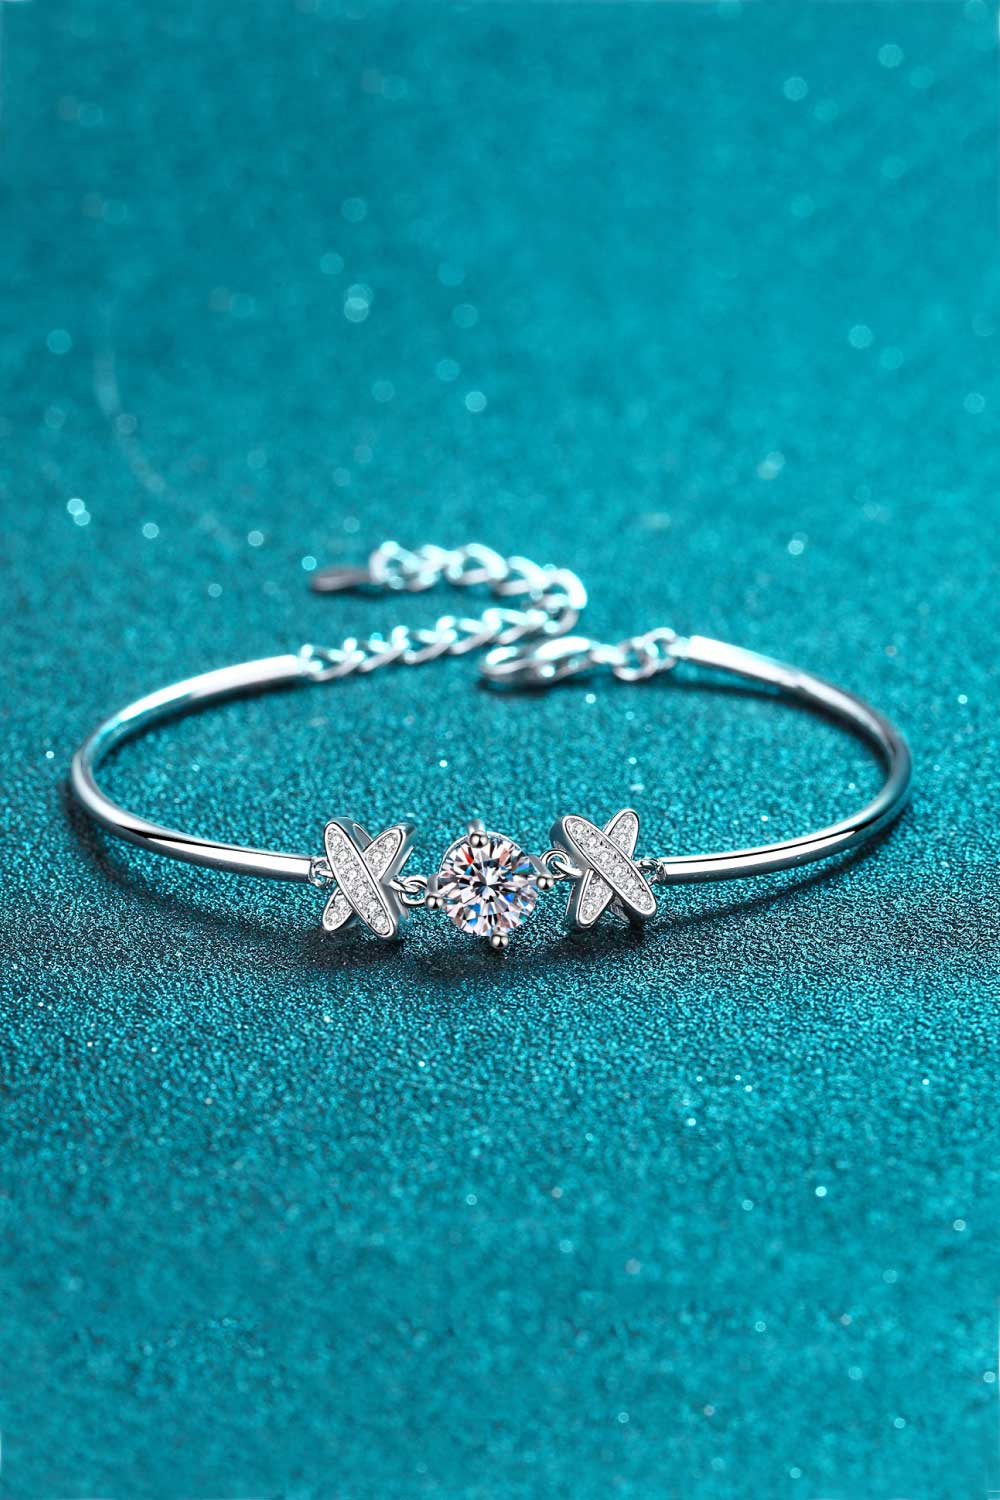 Adored Happy State of Mind 1 Carat Moissanite Bracelet - Kawaii Stop - Adored, Bracelet, Bracelets, Certificate Included, Gift for Her, Jewelry for Women, Luxury Fashion, Moissanite Bracelet, Rhodium-Plated, Ship From Overseas, Sparkling Zircon, Sterling Silver Jewelry, Timeless Elegance